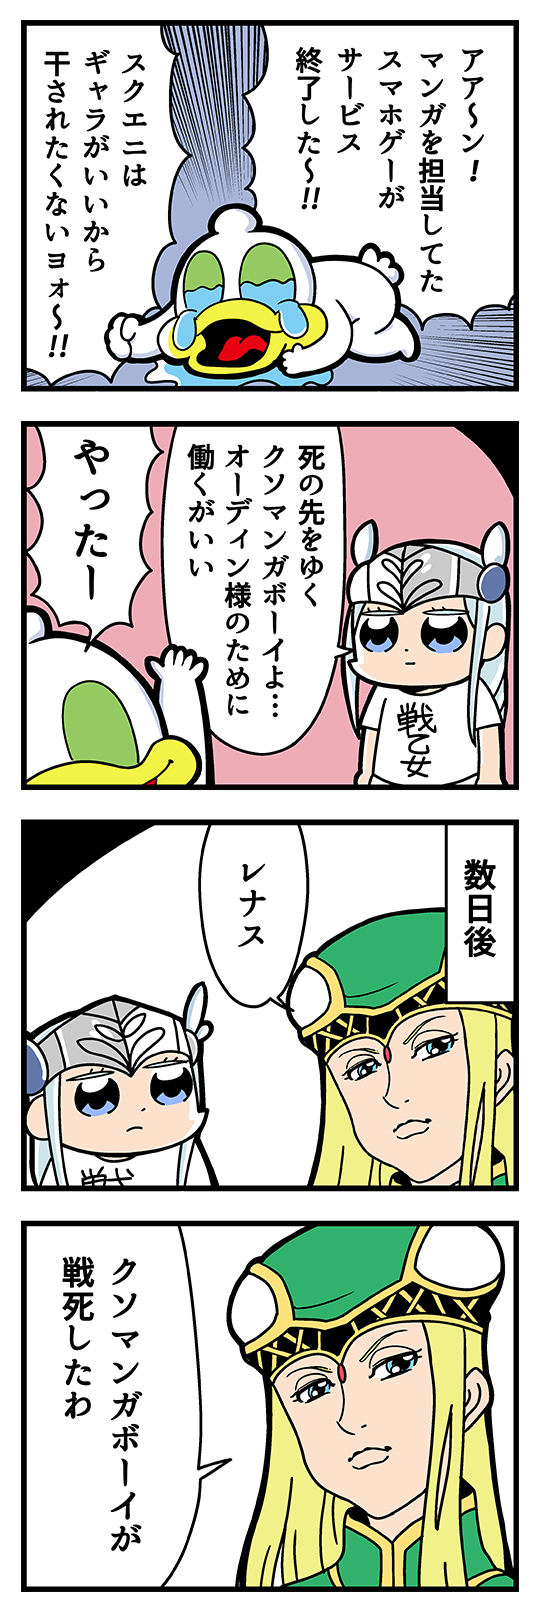 1boy 2girls 4koma bkub blonde_hair blue_eyes comic crying crying_with_eyes_open duckman emphasis_lines gem green_headwear grey_hair hat helmet highres lenneth_valkyrie long_hair multiple_girls on_ground open_mouth shirt simple_background speech_bubble t-shirt talking tears translation_request two-tone_background two_side_up valkyrie_profile valkyrie_profile_anatomia winged_helmet